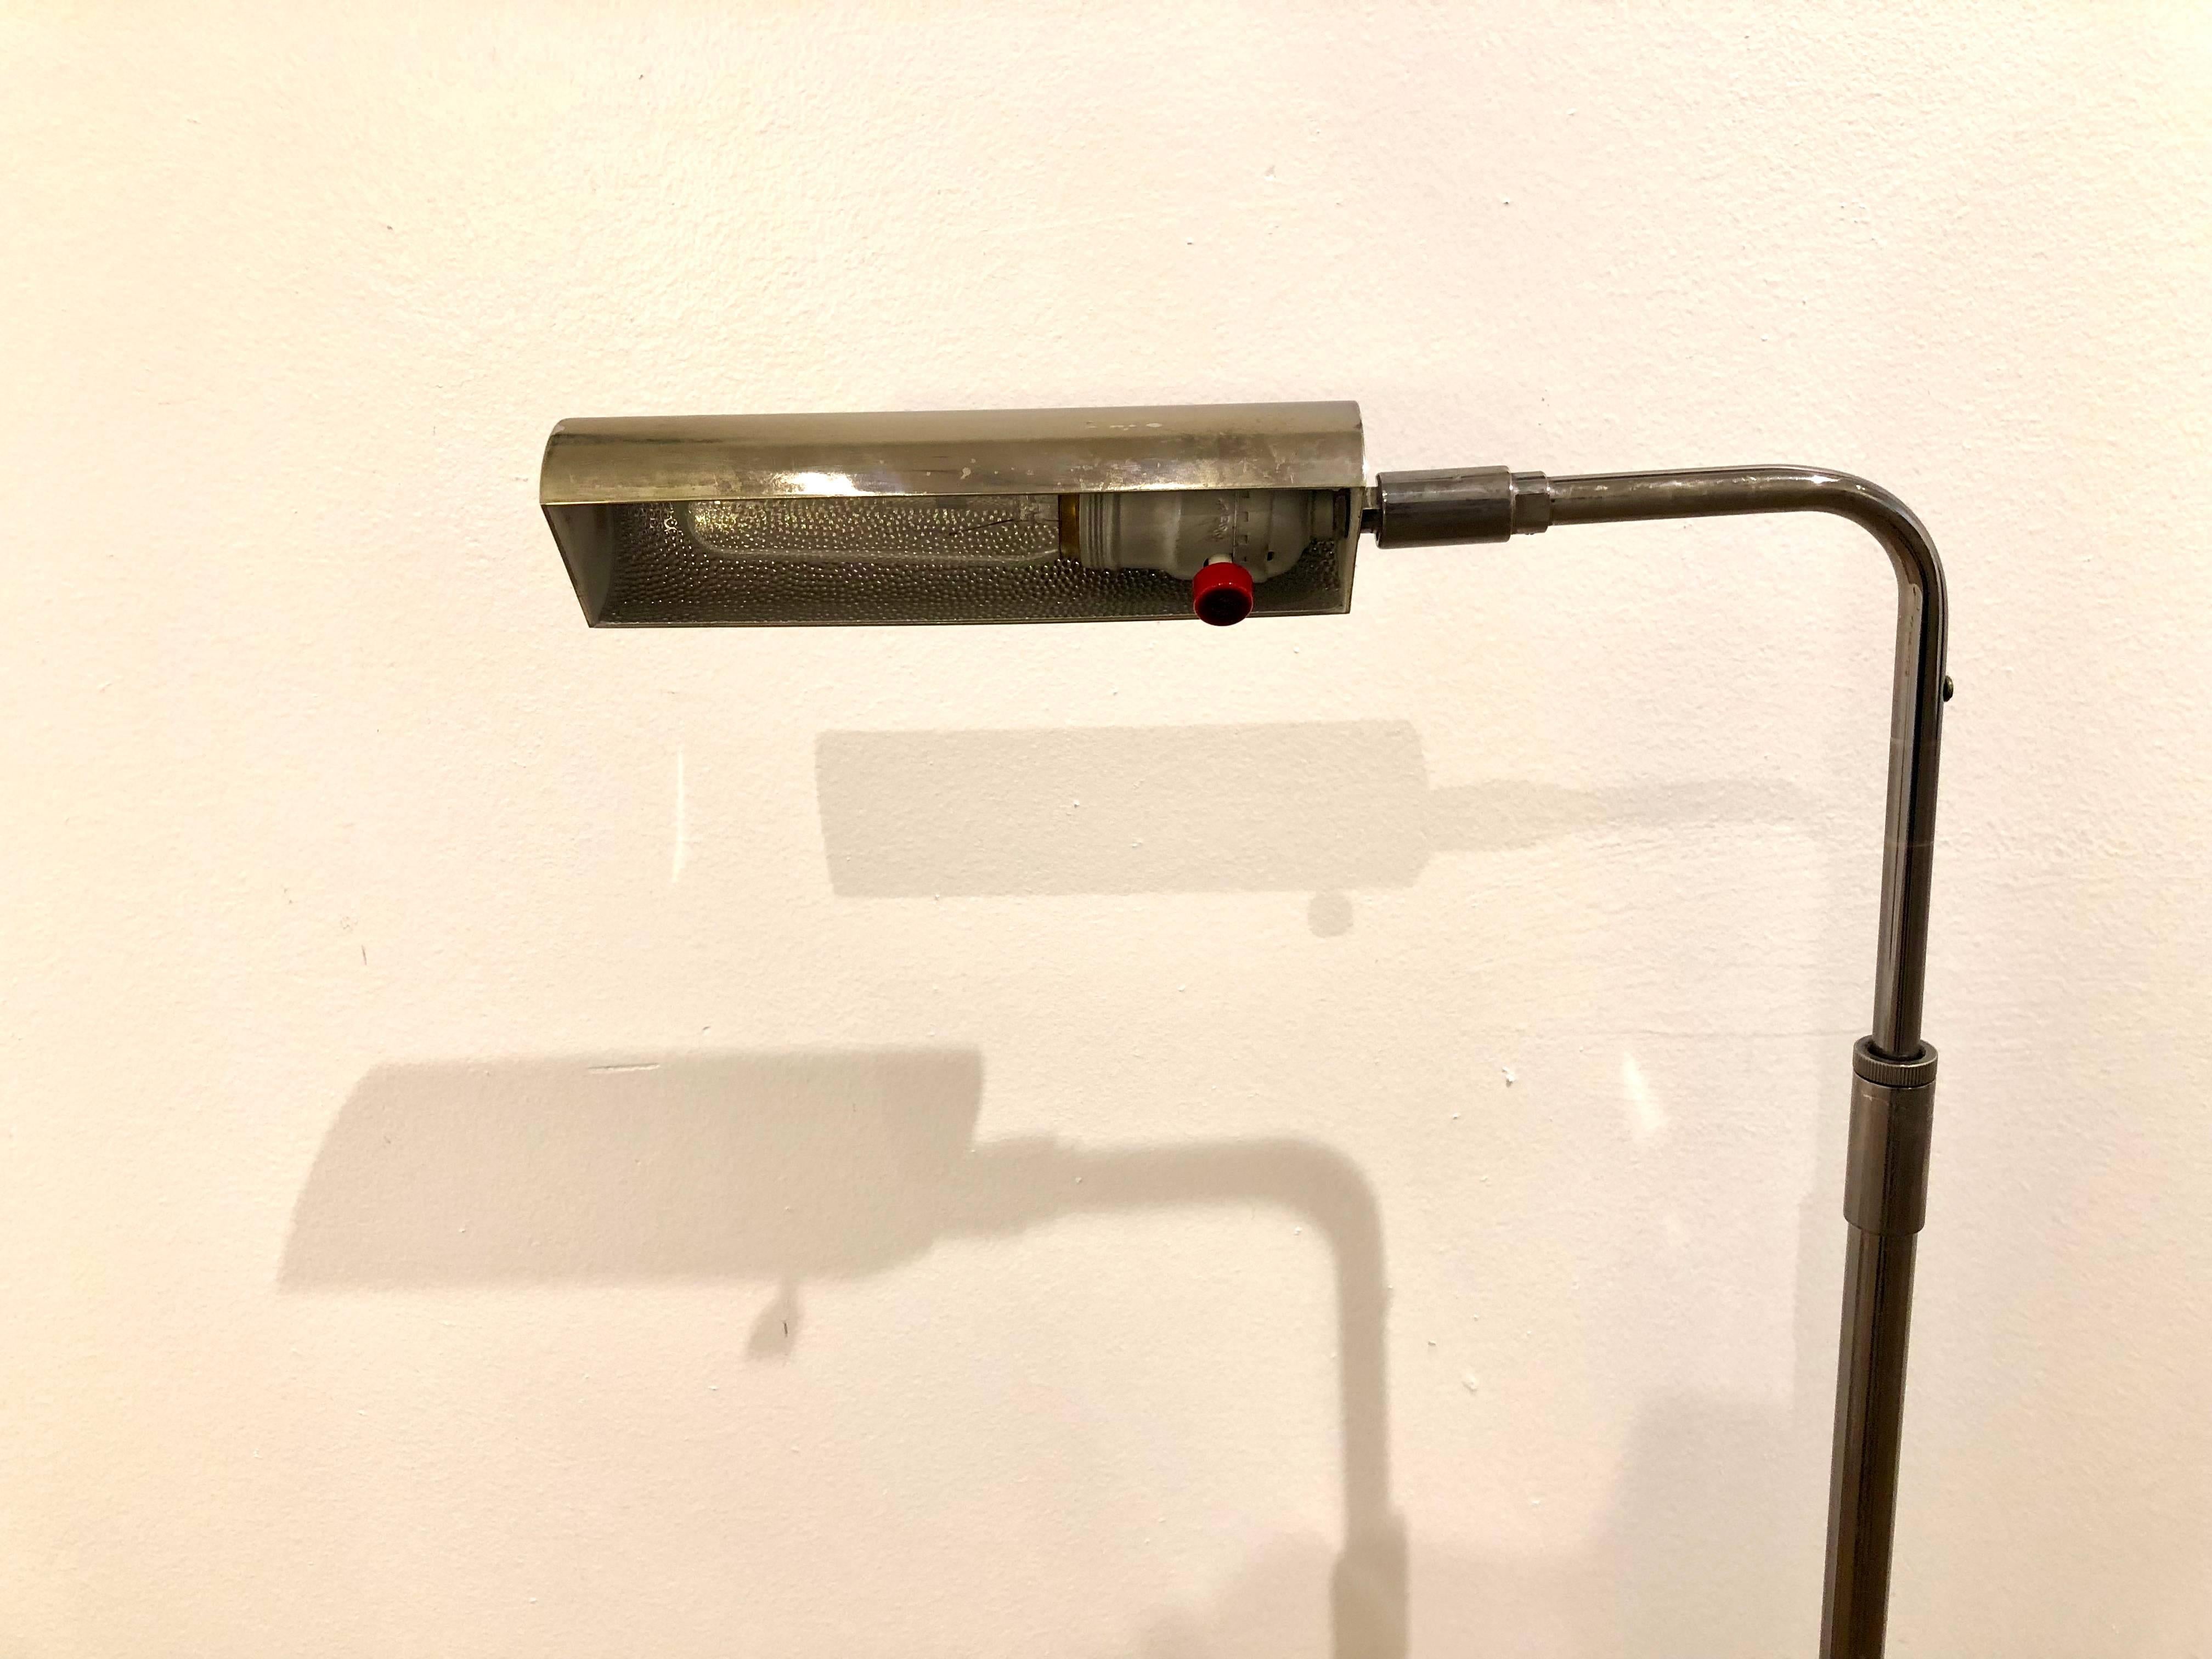 Fine chrome pharmacy lamp by Koch & Lowy. The lamp is height adjustable and swivel. The shade is also four-way adjustable. With dimmer switch and bakelite, a rare early production piece the chrome finish shows natural wear due to age, measure: base